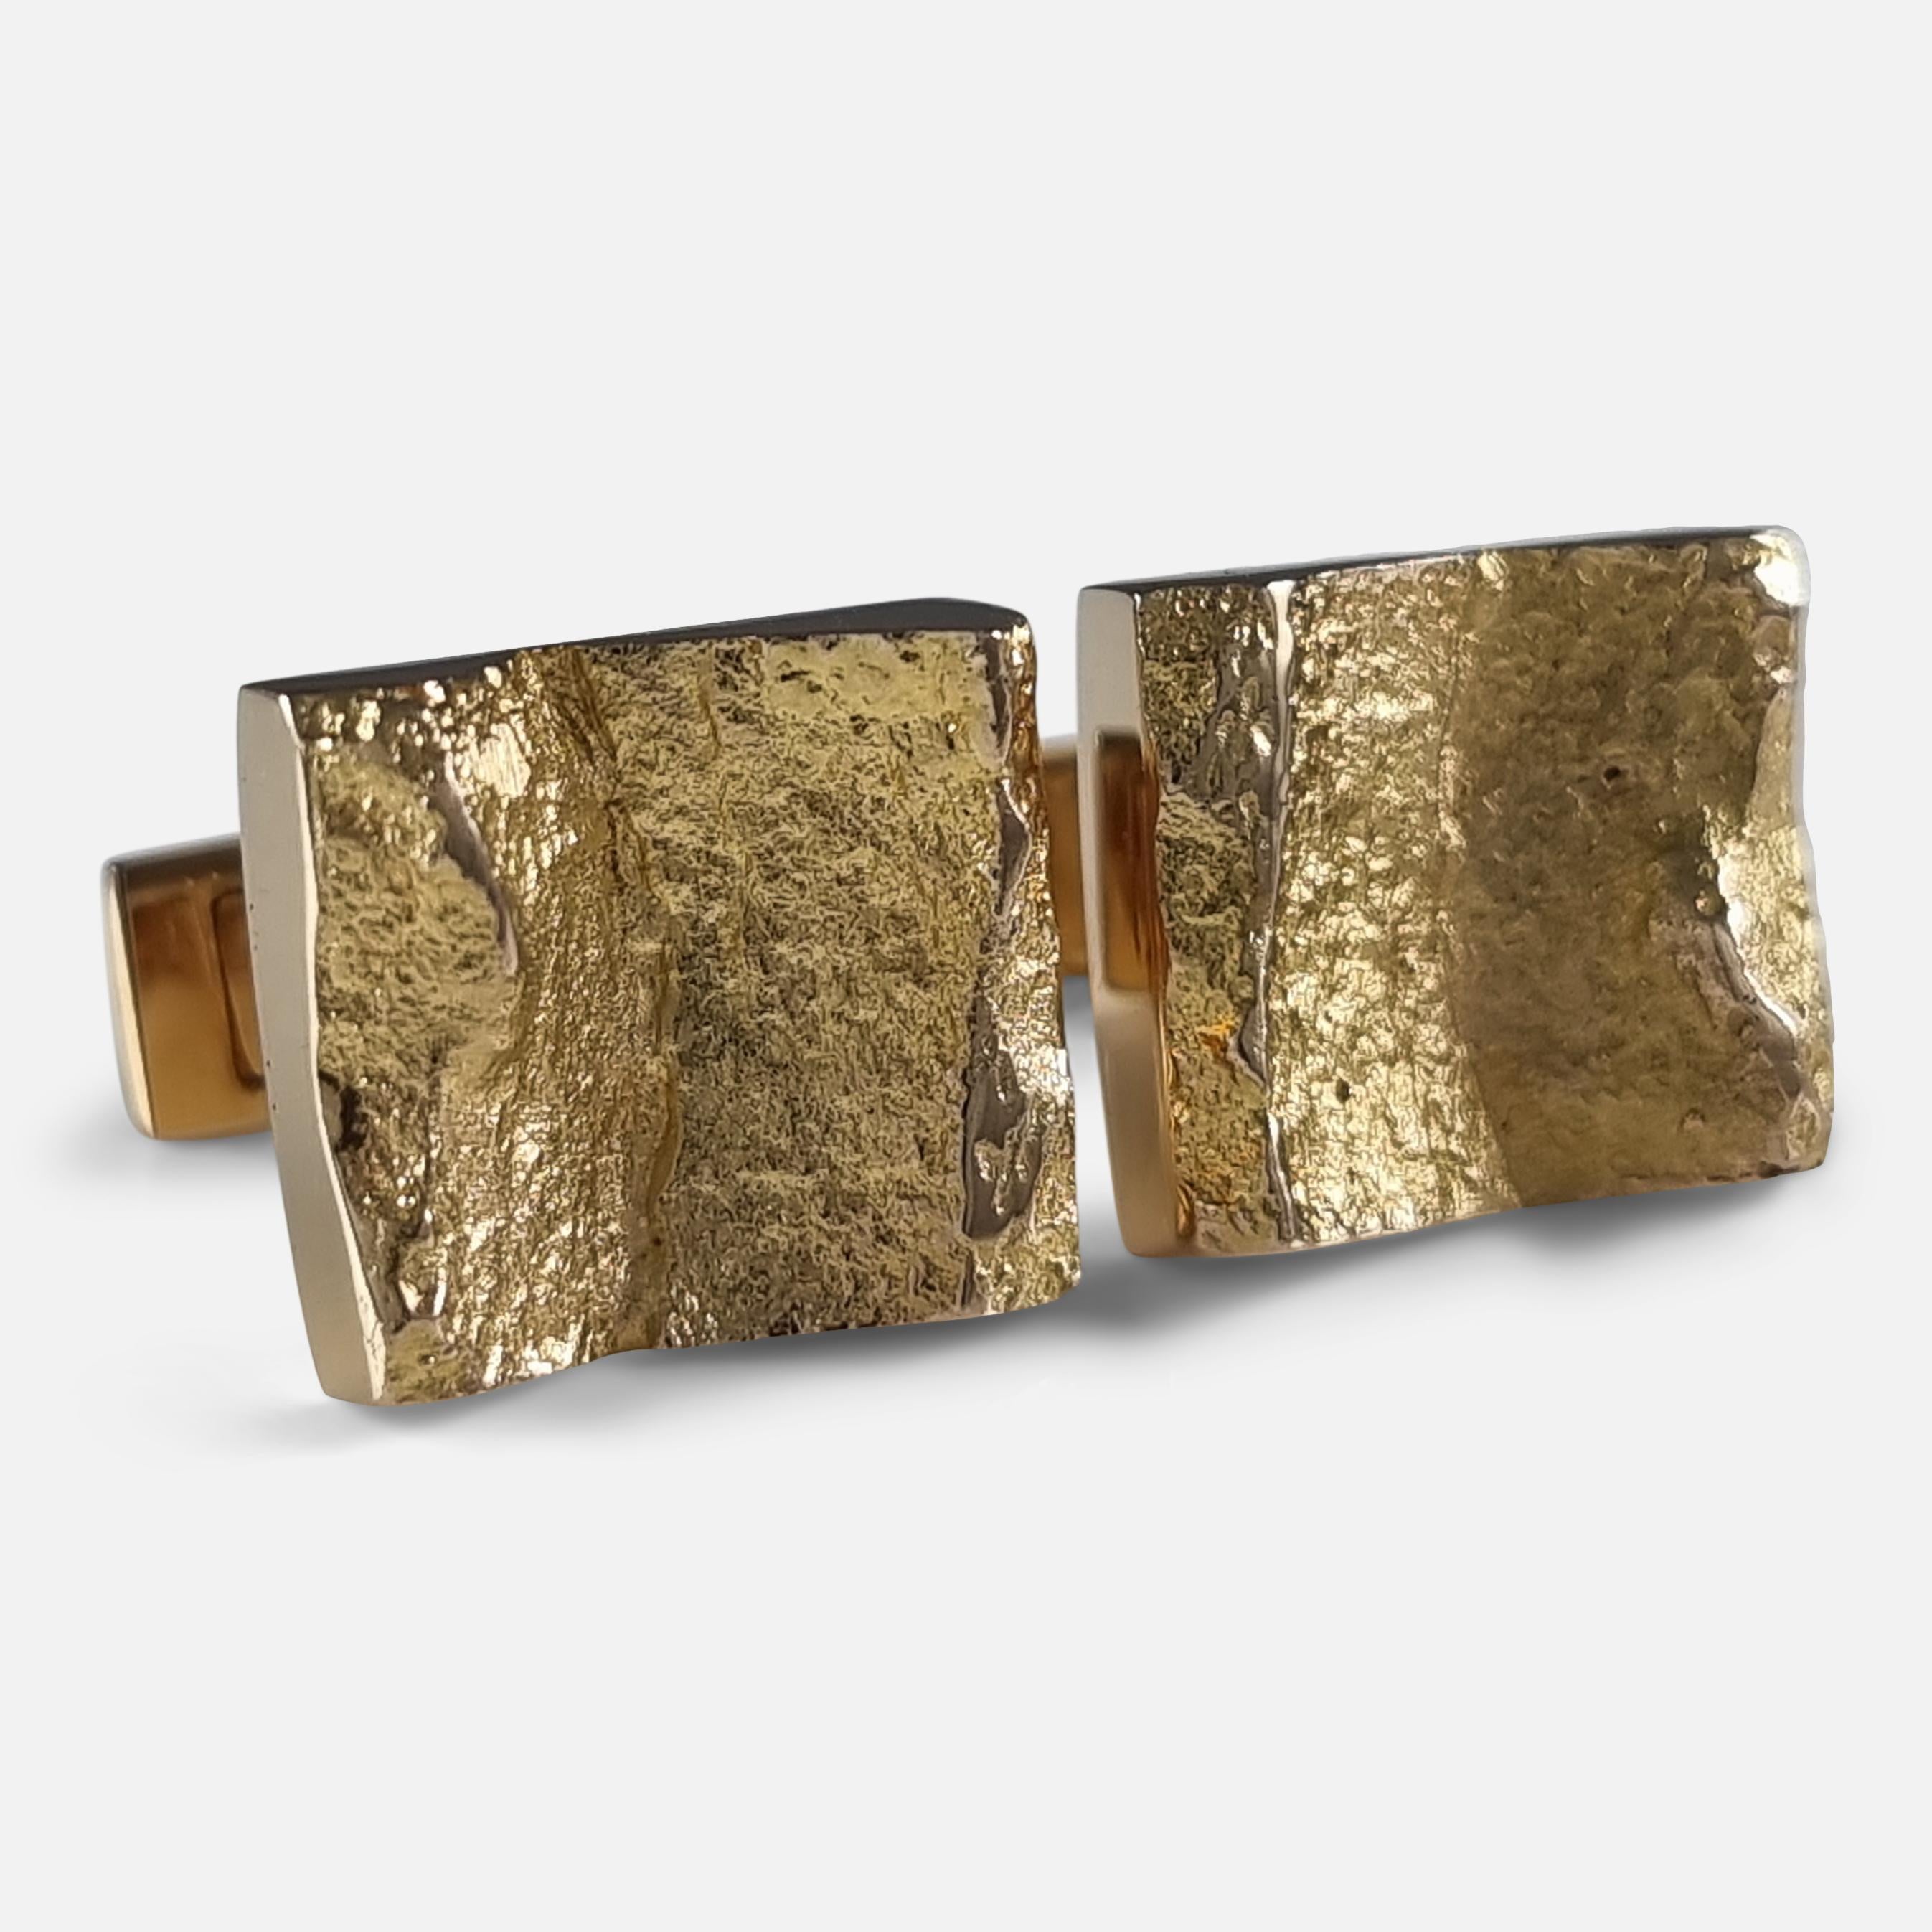 A pair of 14ct yellow gold 'Ravines' cufflinks designed by Björn Weckström for Lapponia. The cufflinks are single-sided, with a textured ravine like form.

The cufflinks are hallmarked with the Finnish national mark, Lapponia makers marks, 'BW' for